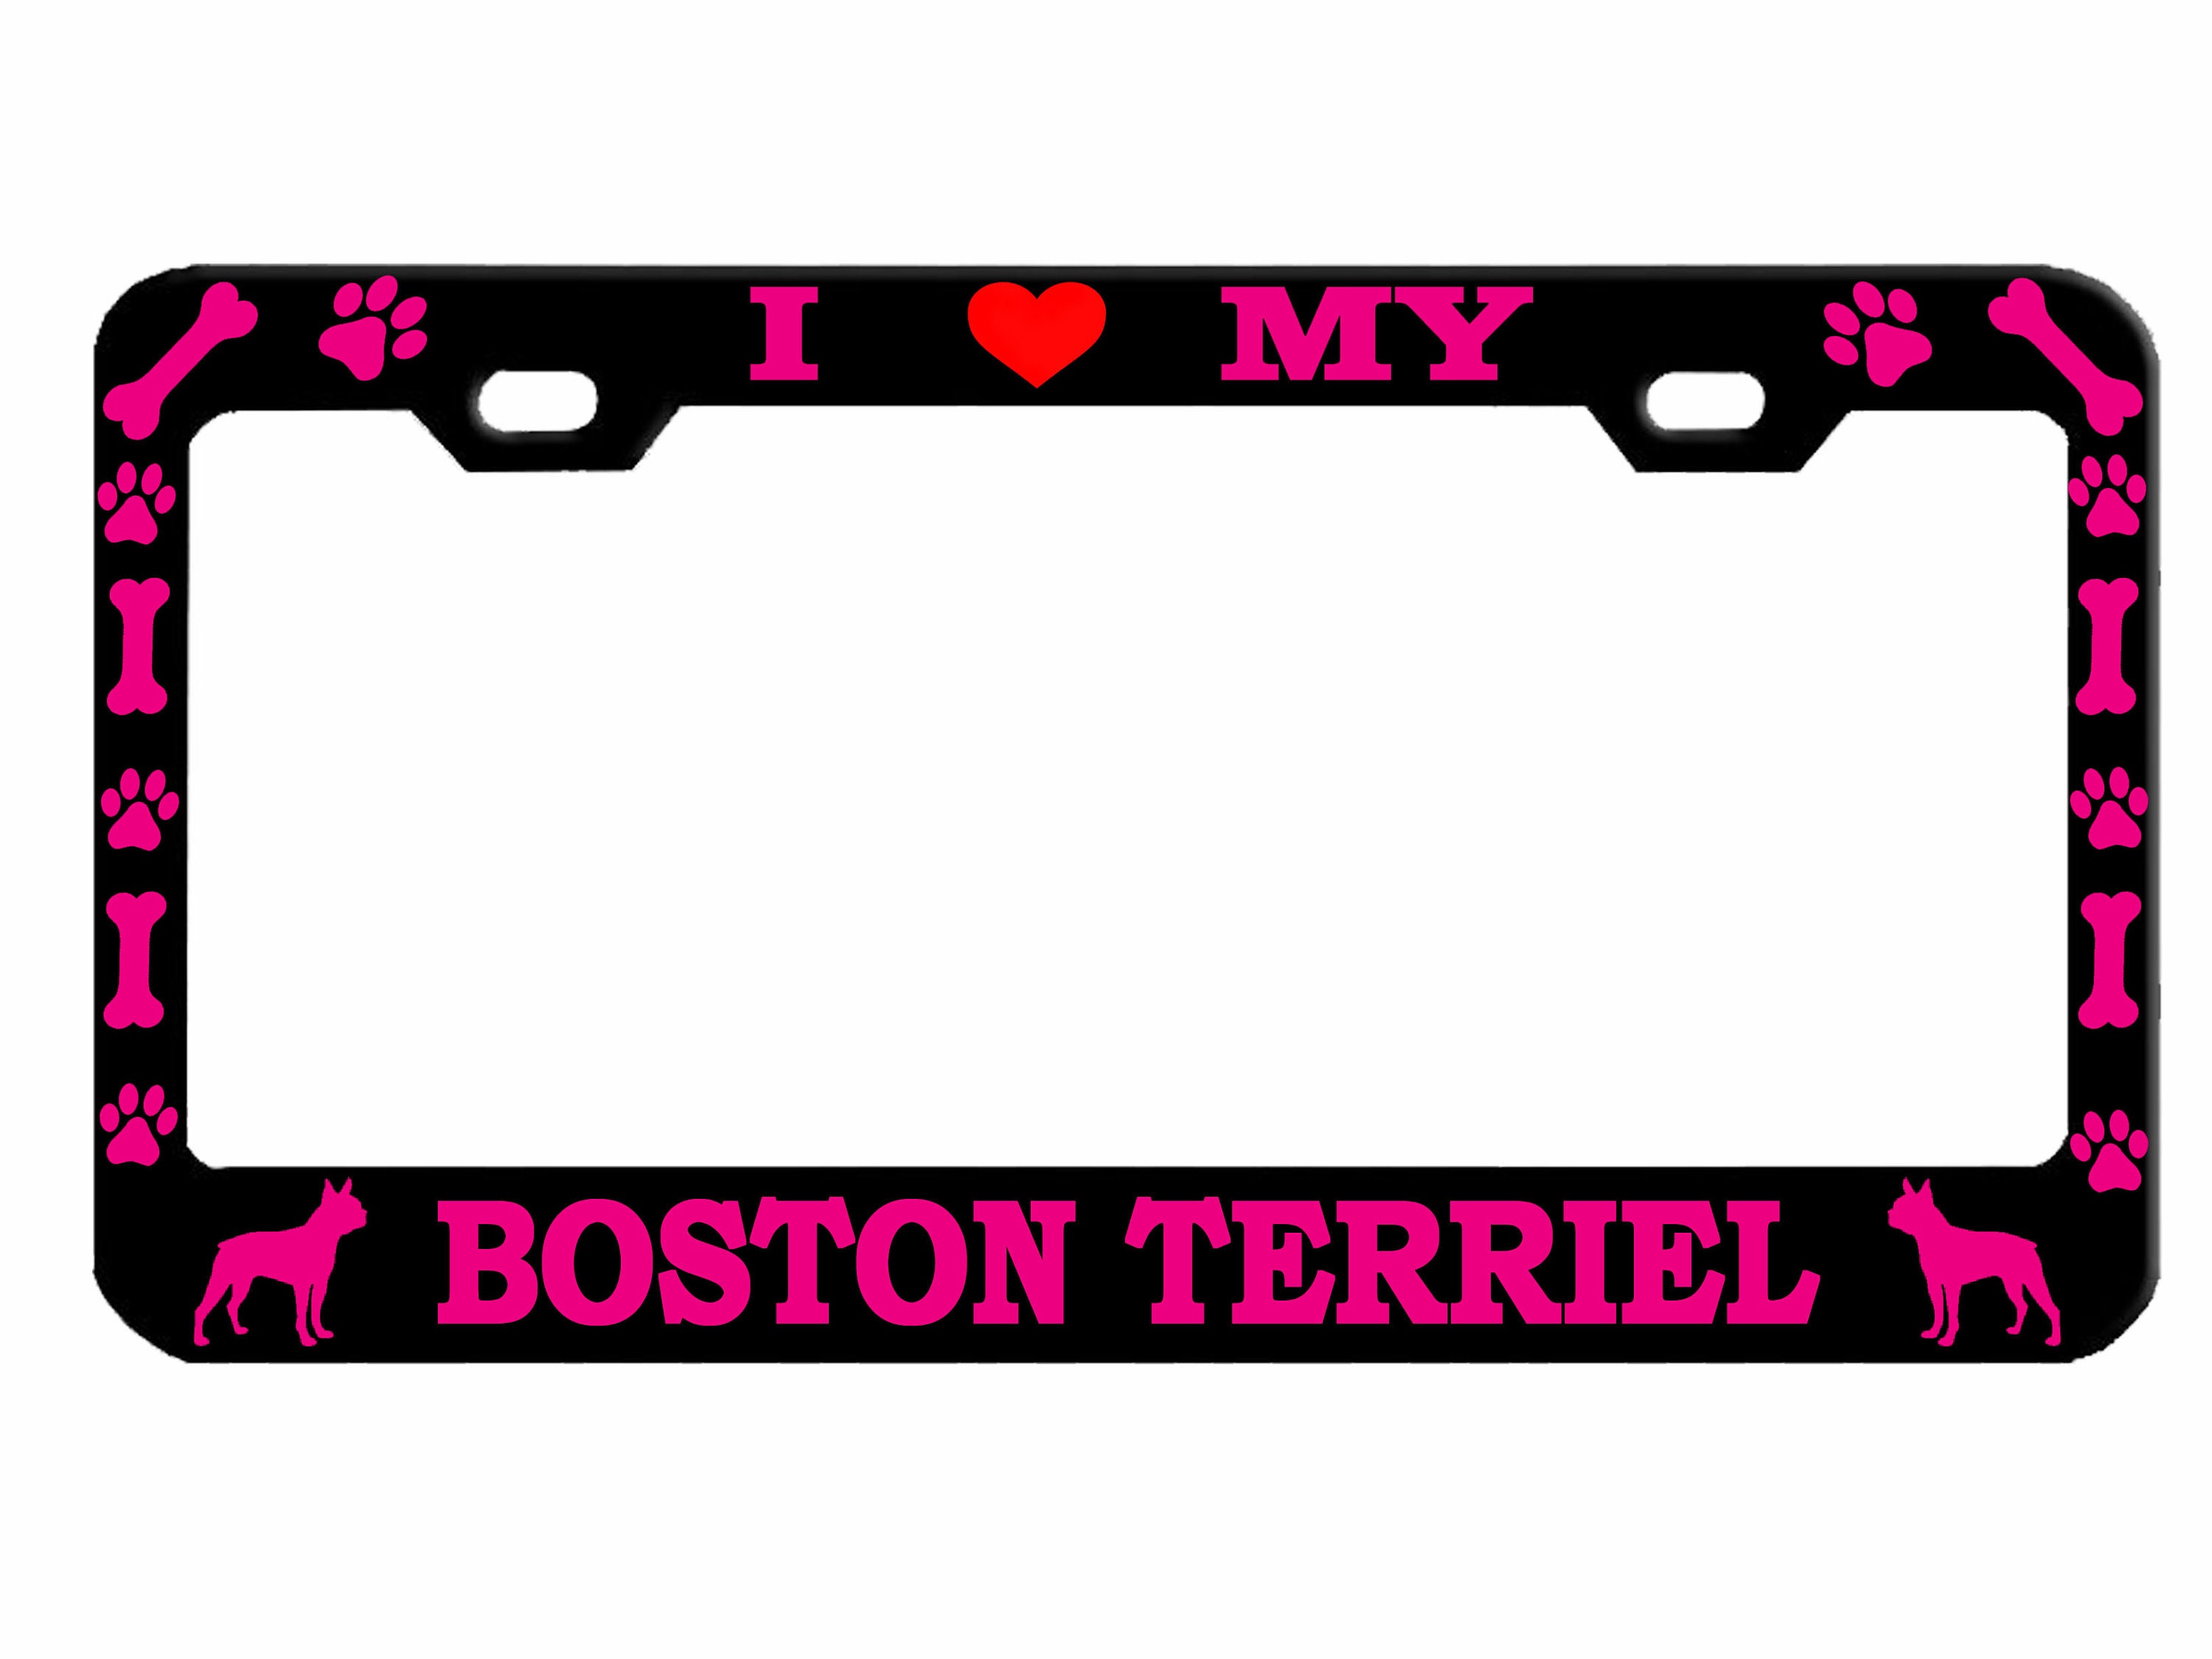 Boston Terrier Dog Breed Auto Car License Plate Frame Tag Holder 4 Hole